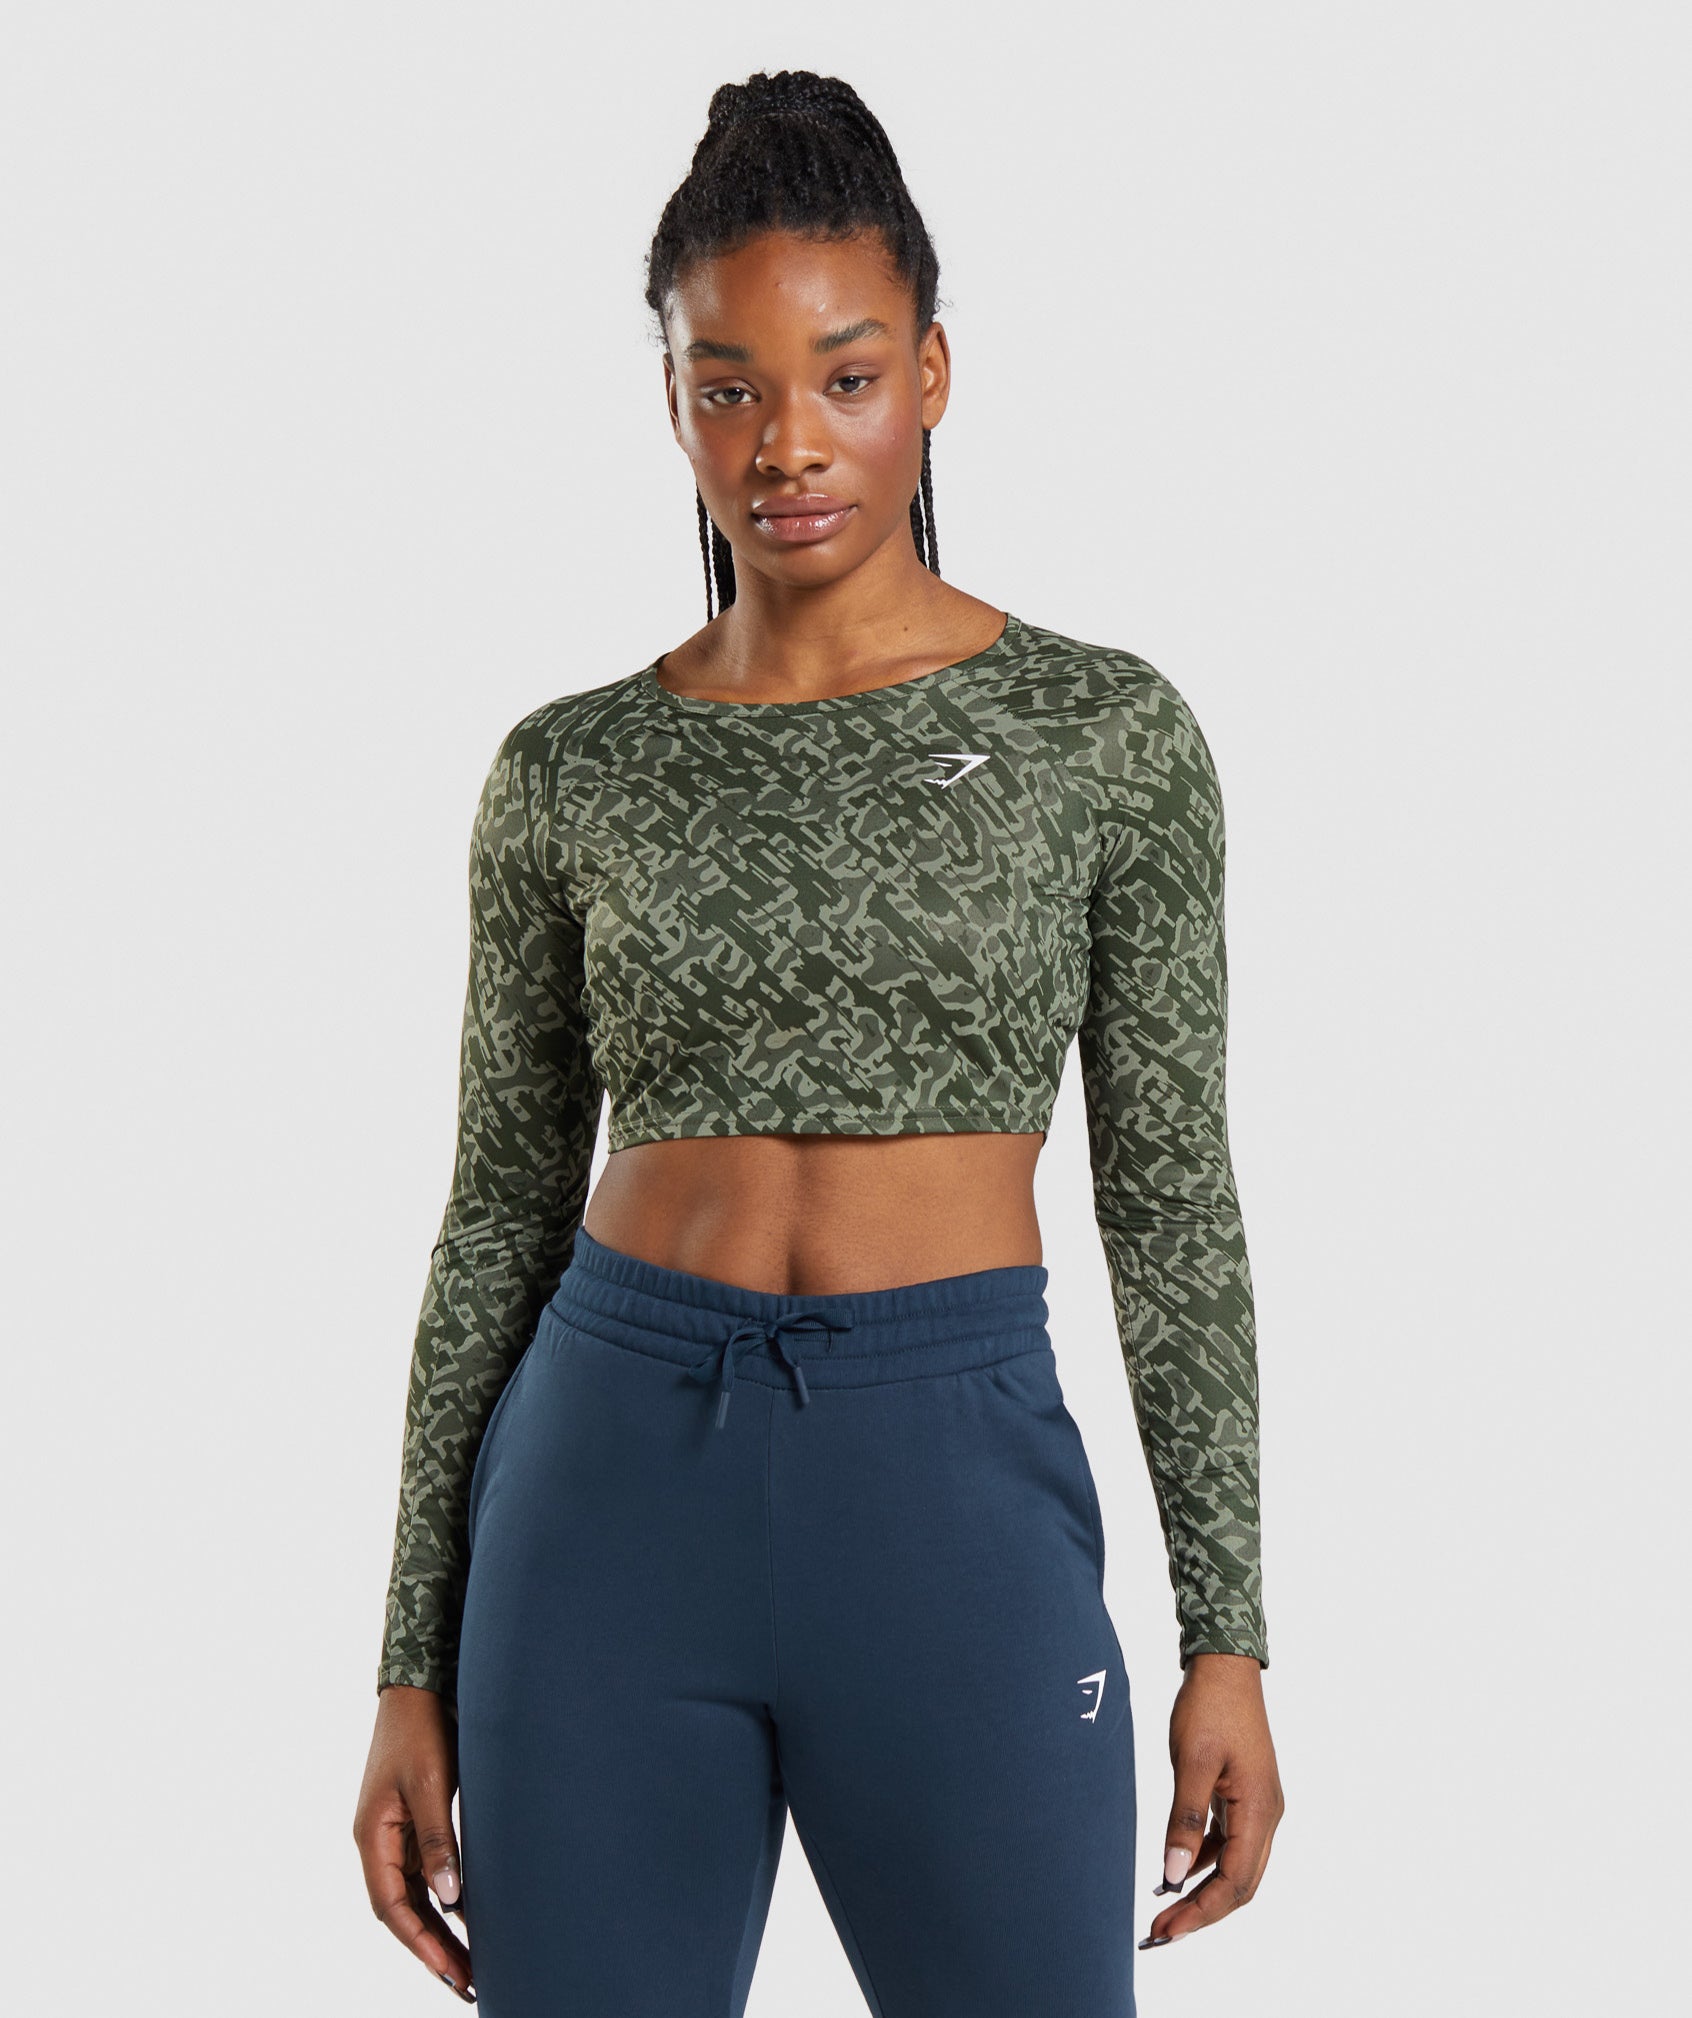 Which colour of leggings match parrot green tops? - Quora